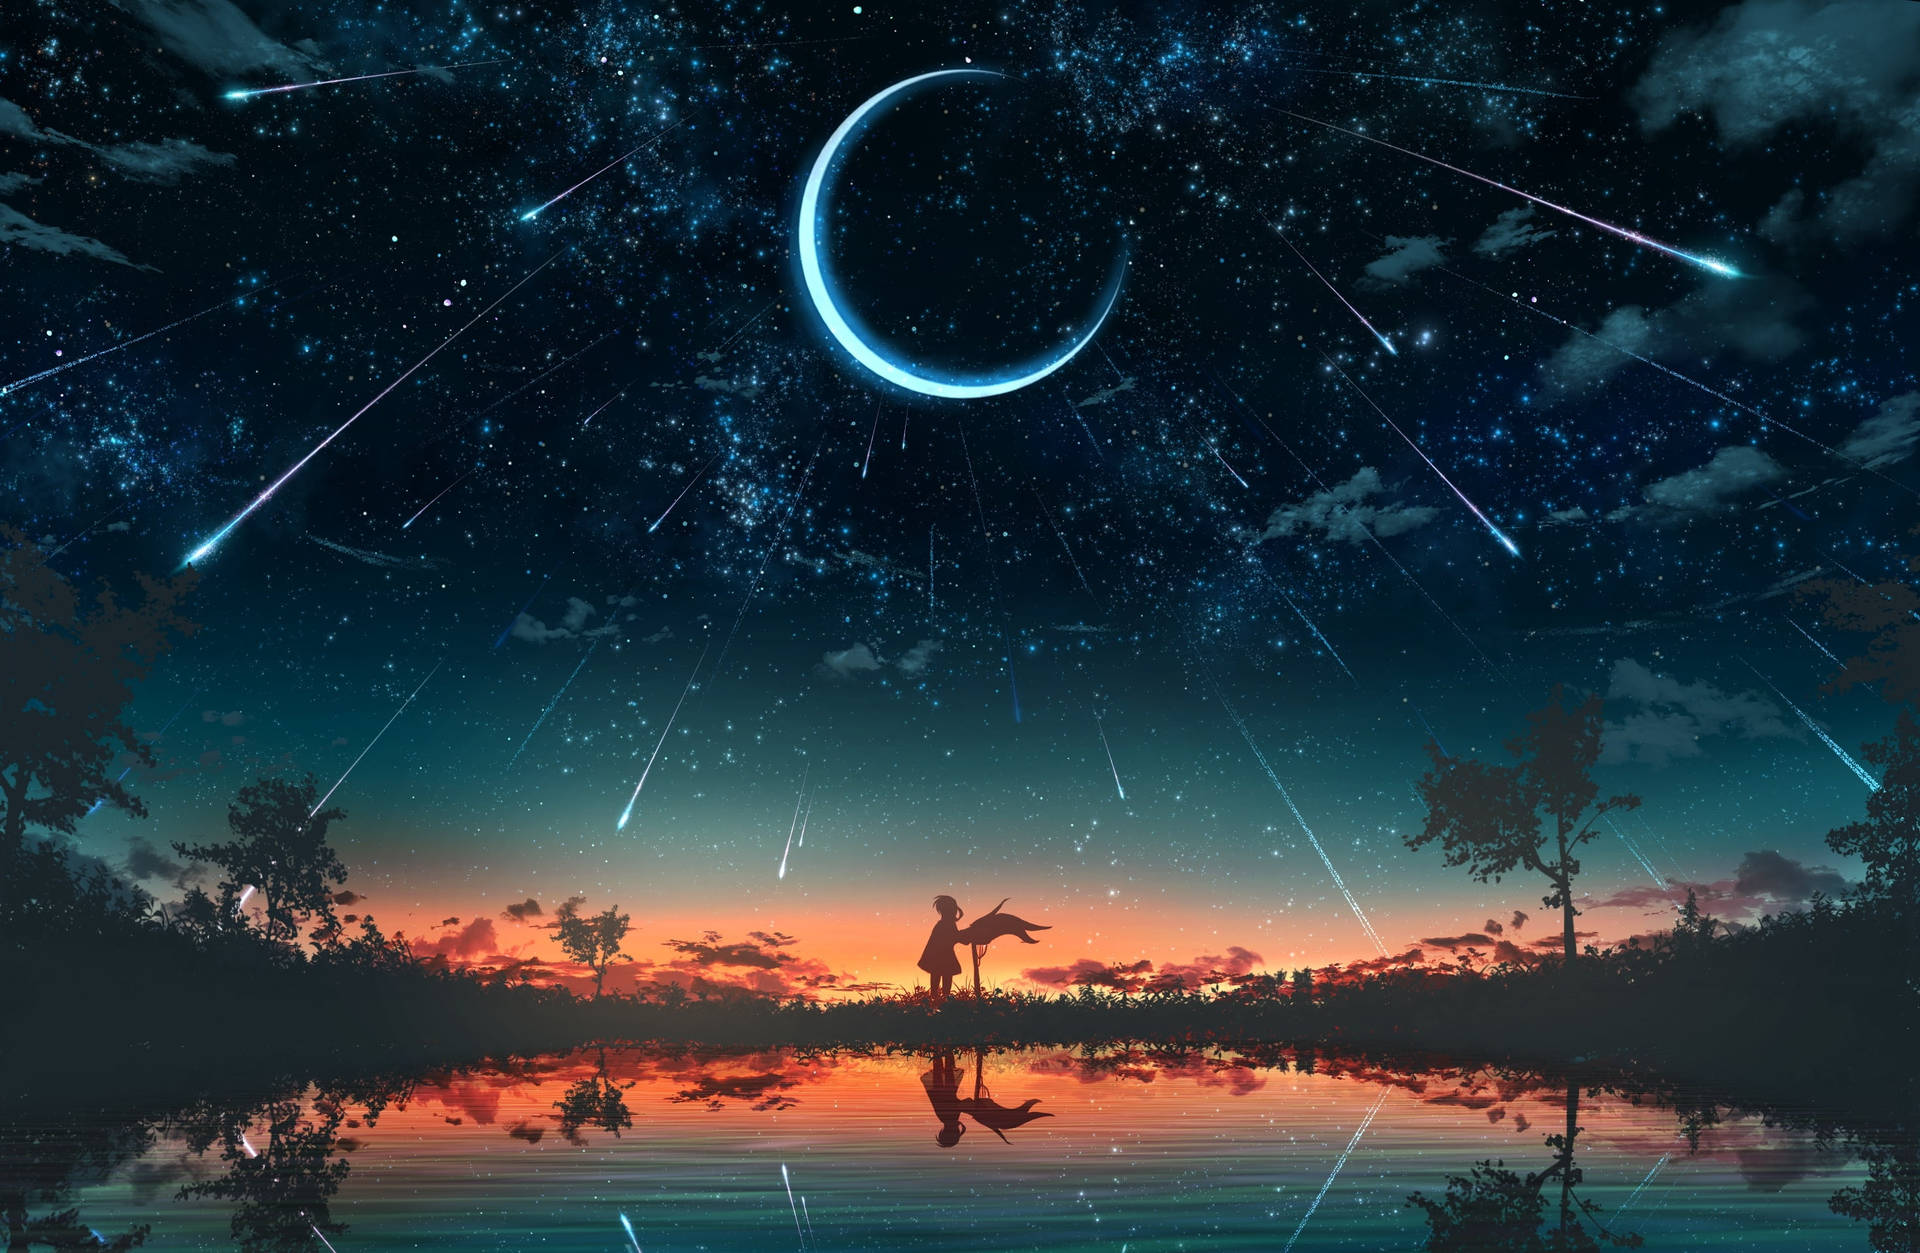 Meteor Shower Aesthetic Anime Scenery Picture